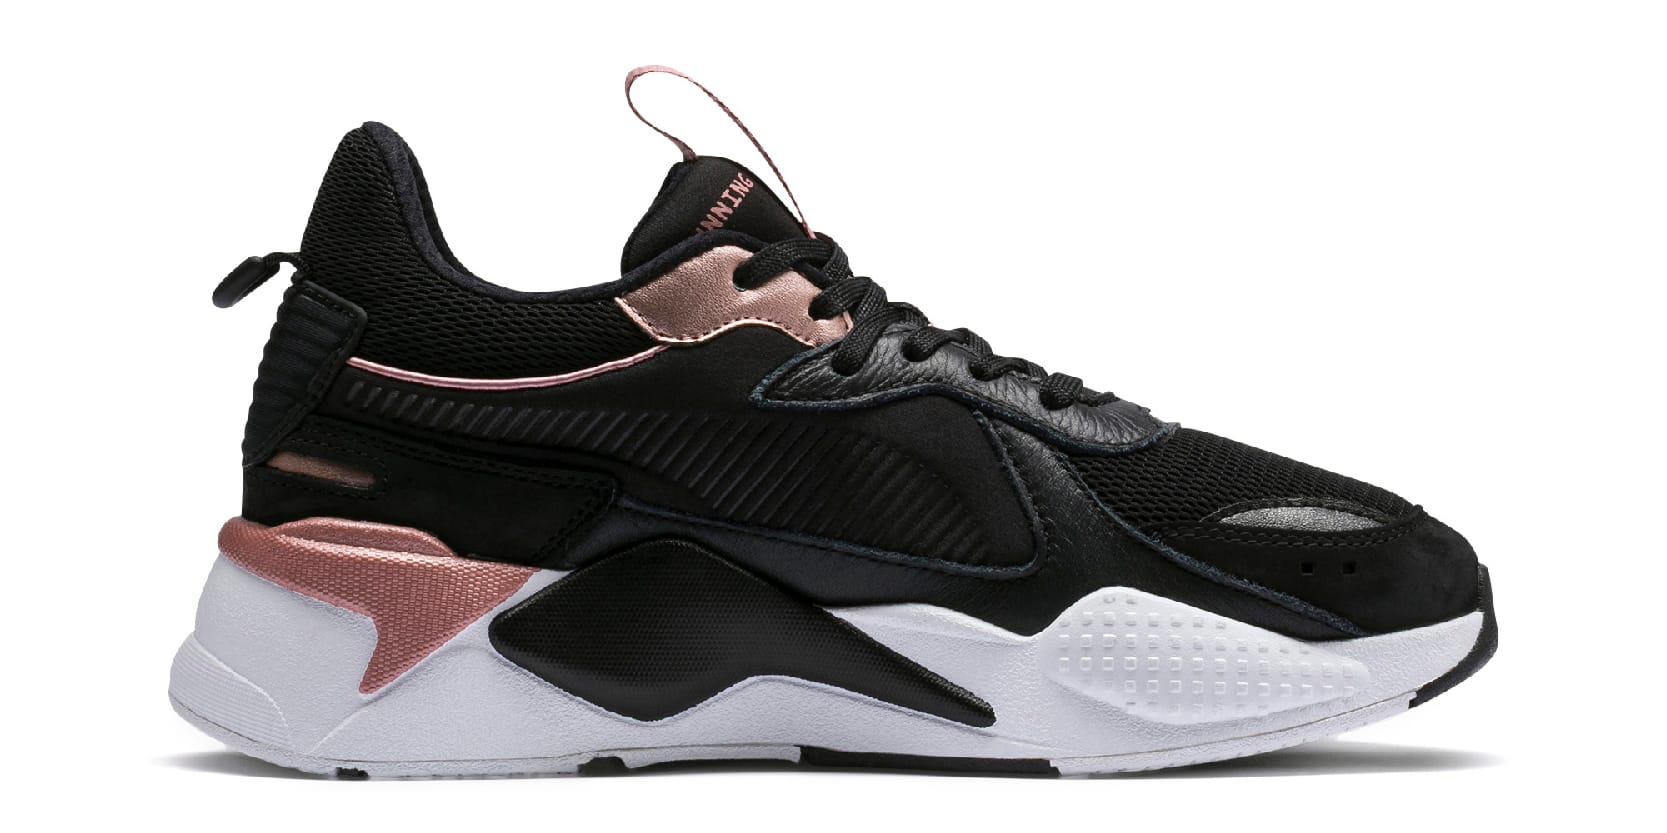 puma-rs-x-trophies-rose-gold-369451-04-medial